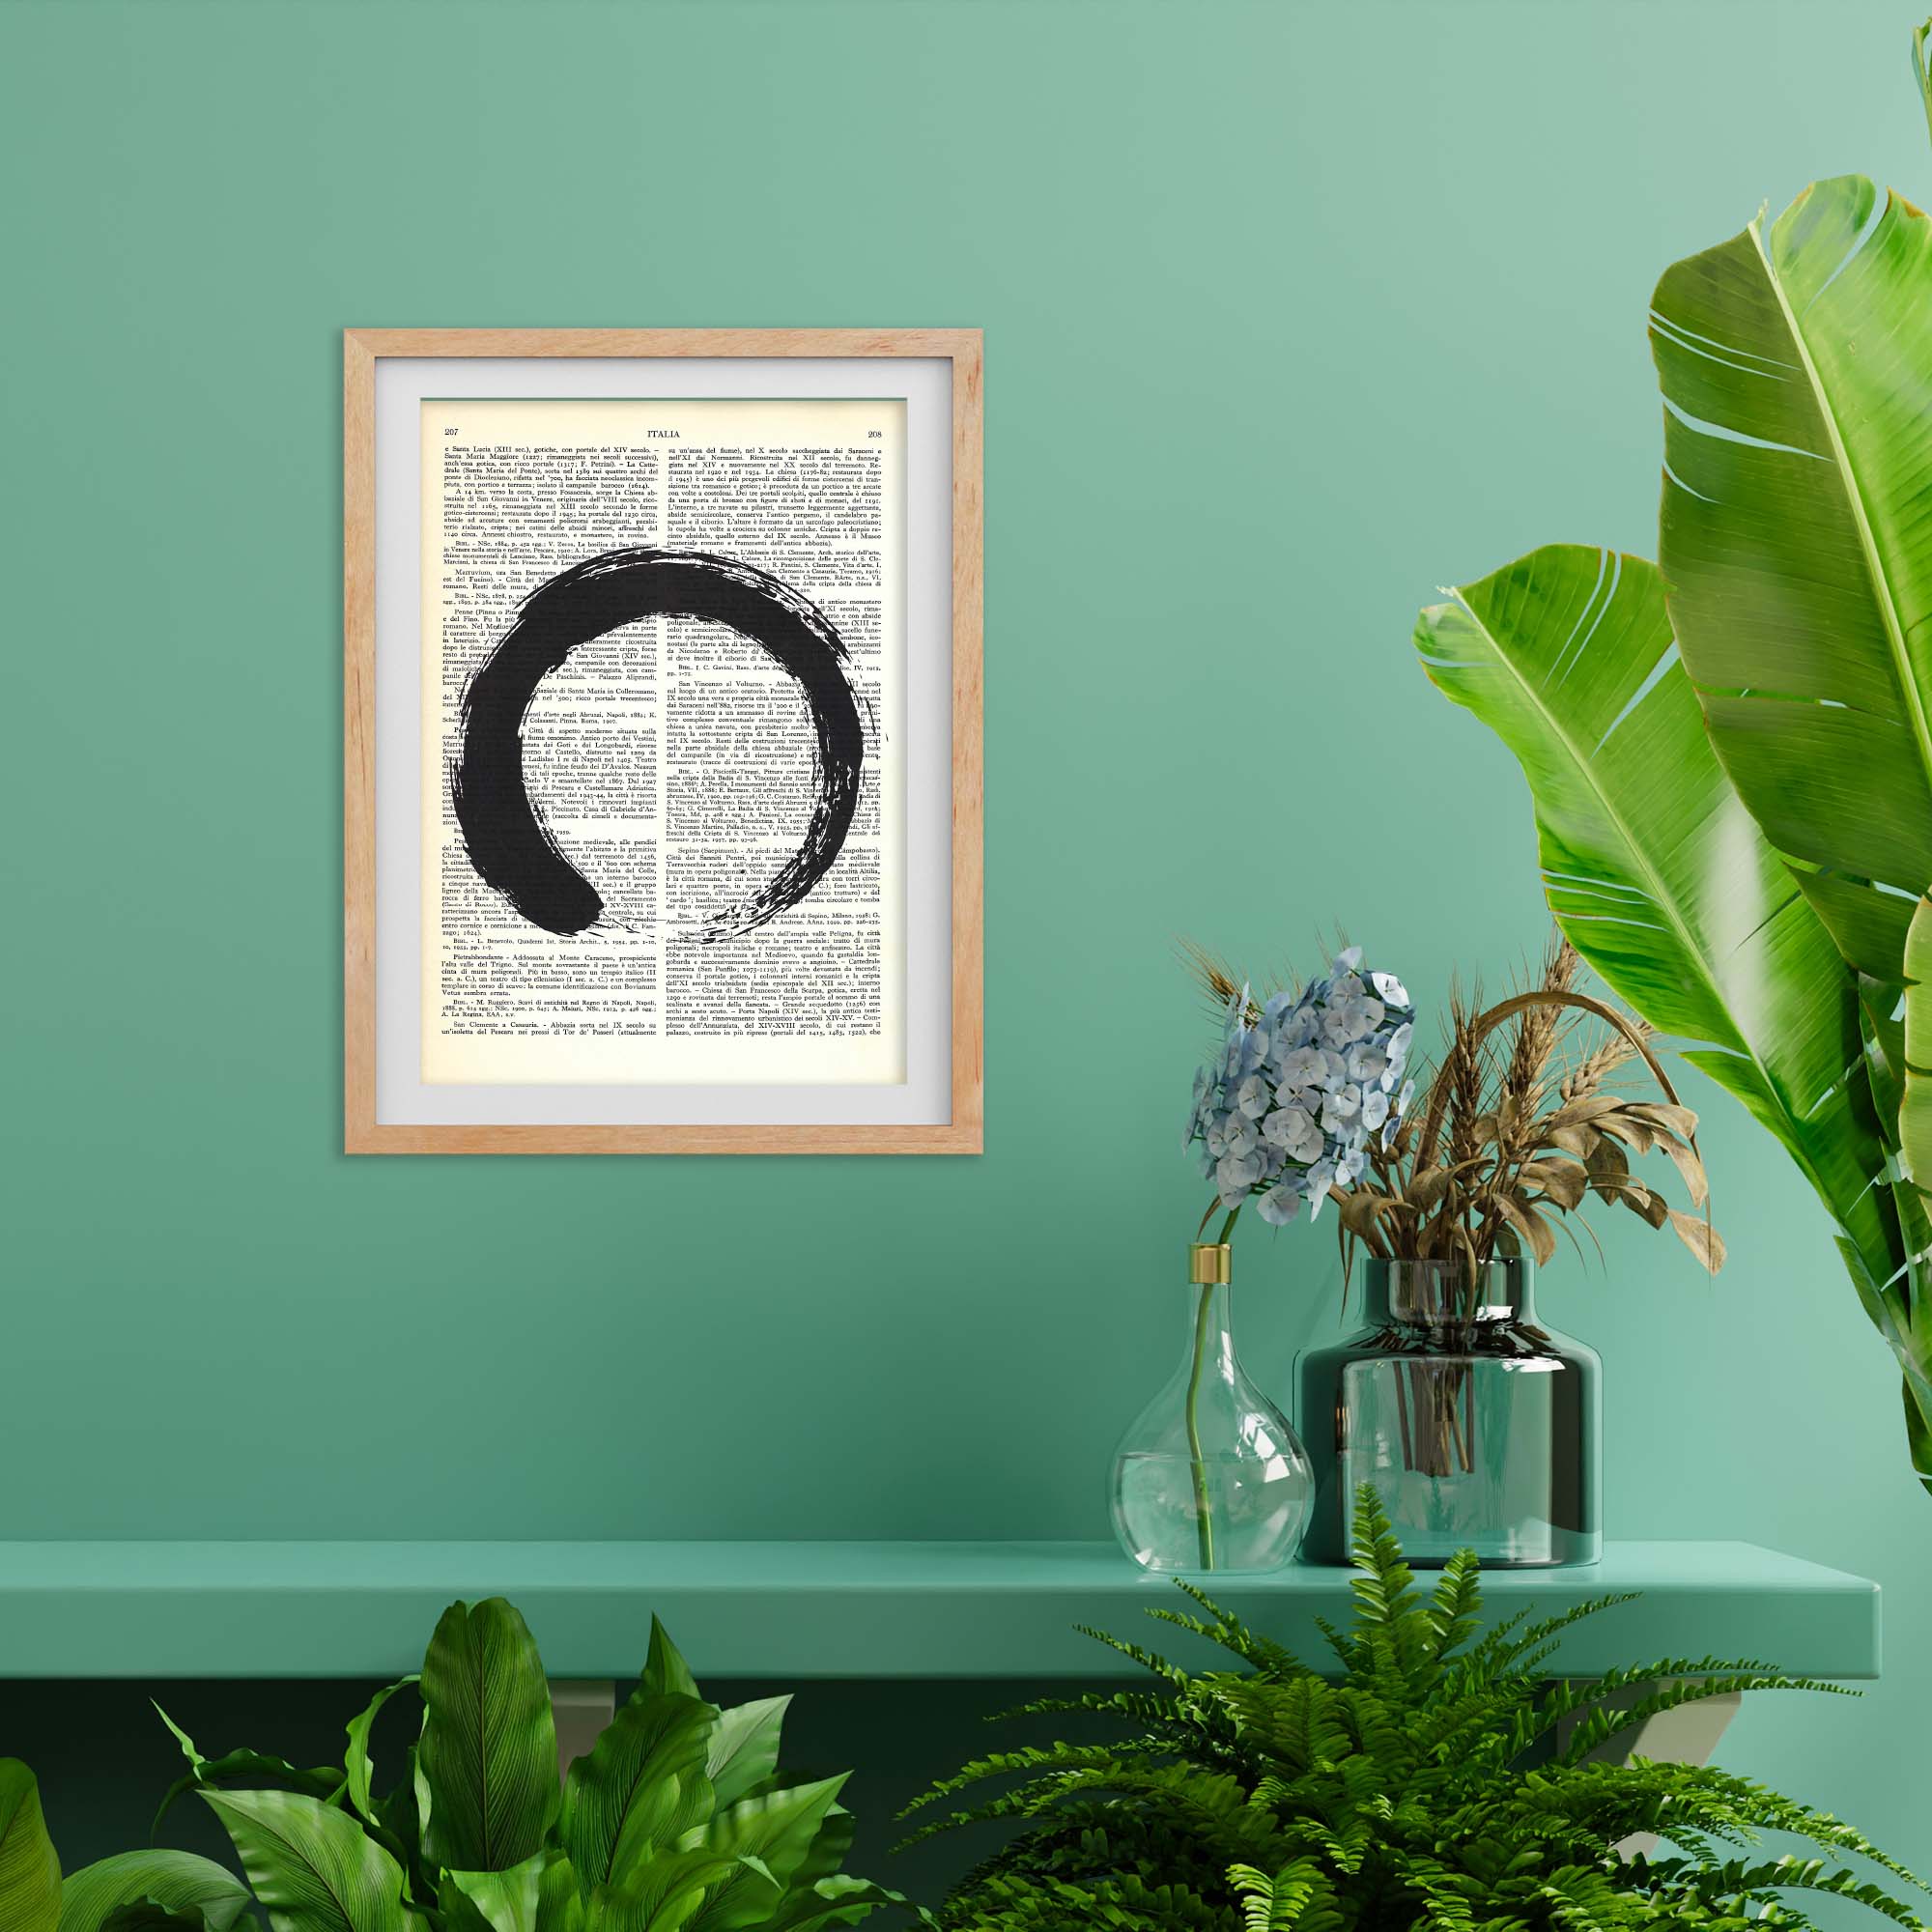 Mix-up: Enso and Zen - Enlightening in a circle